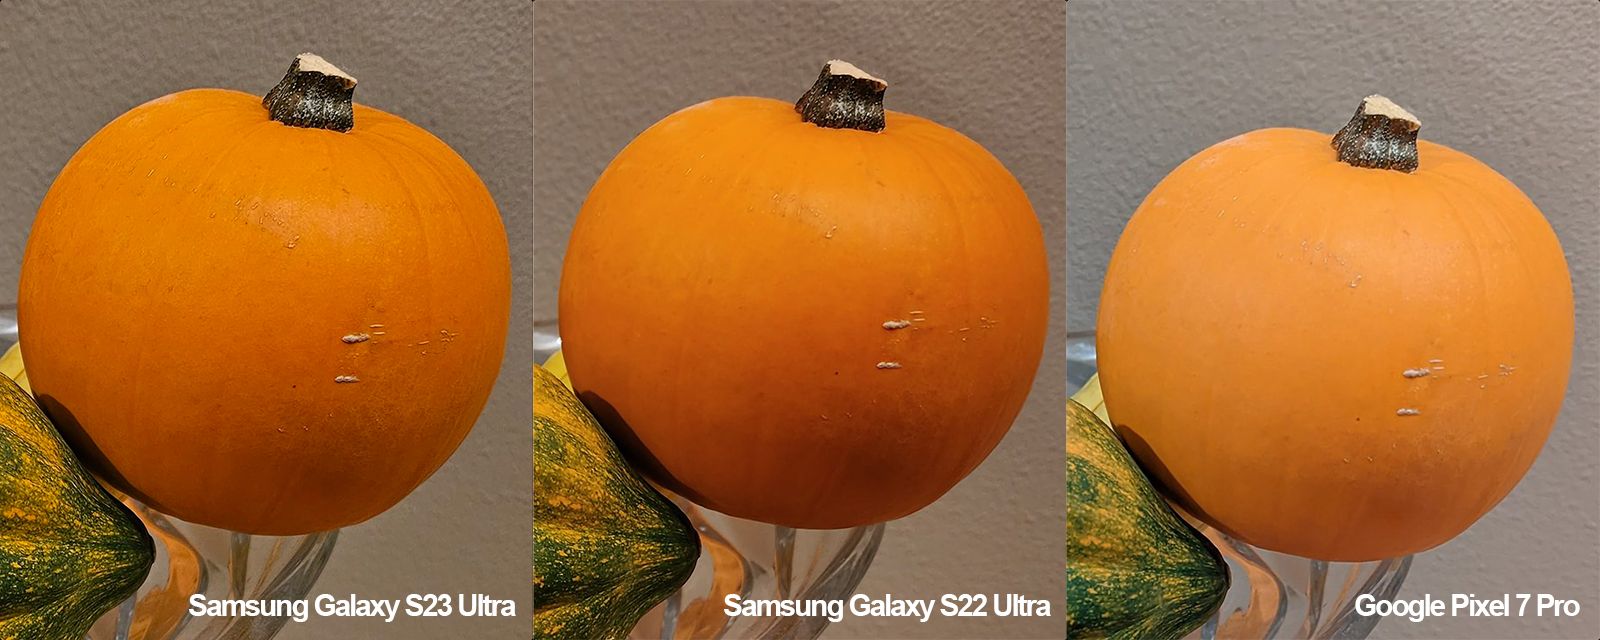 Samsung Galaxy S23 Ultra camera tested against S22 Ultra and Pixel 7 Pro photo 3